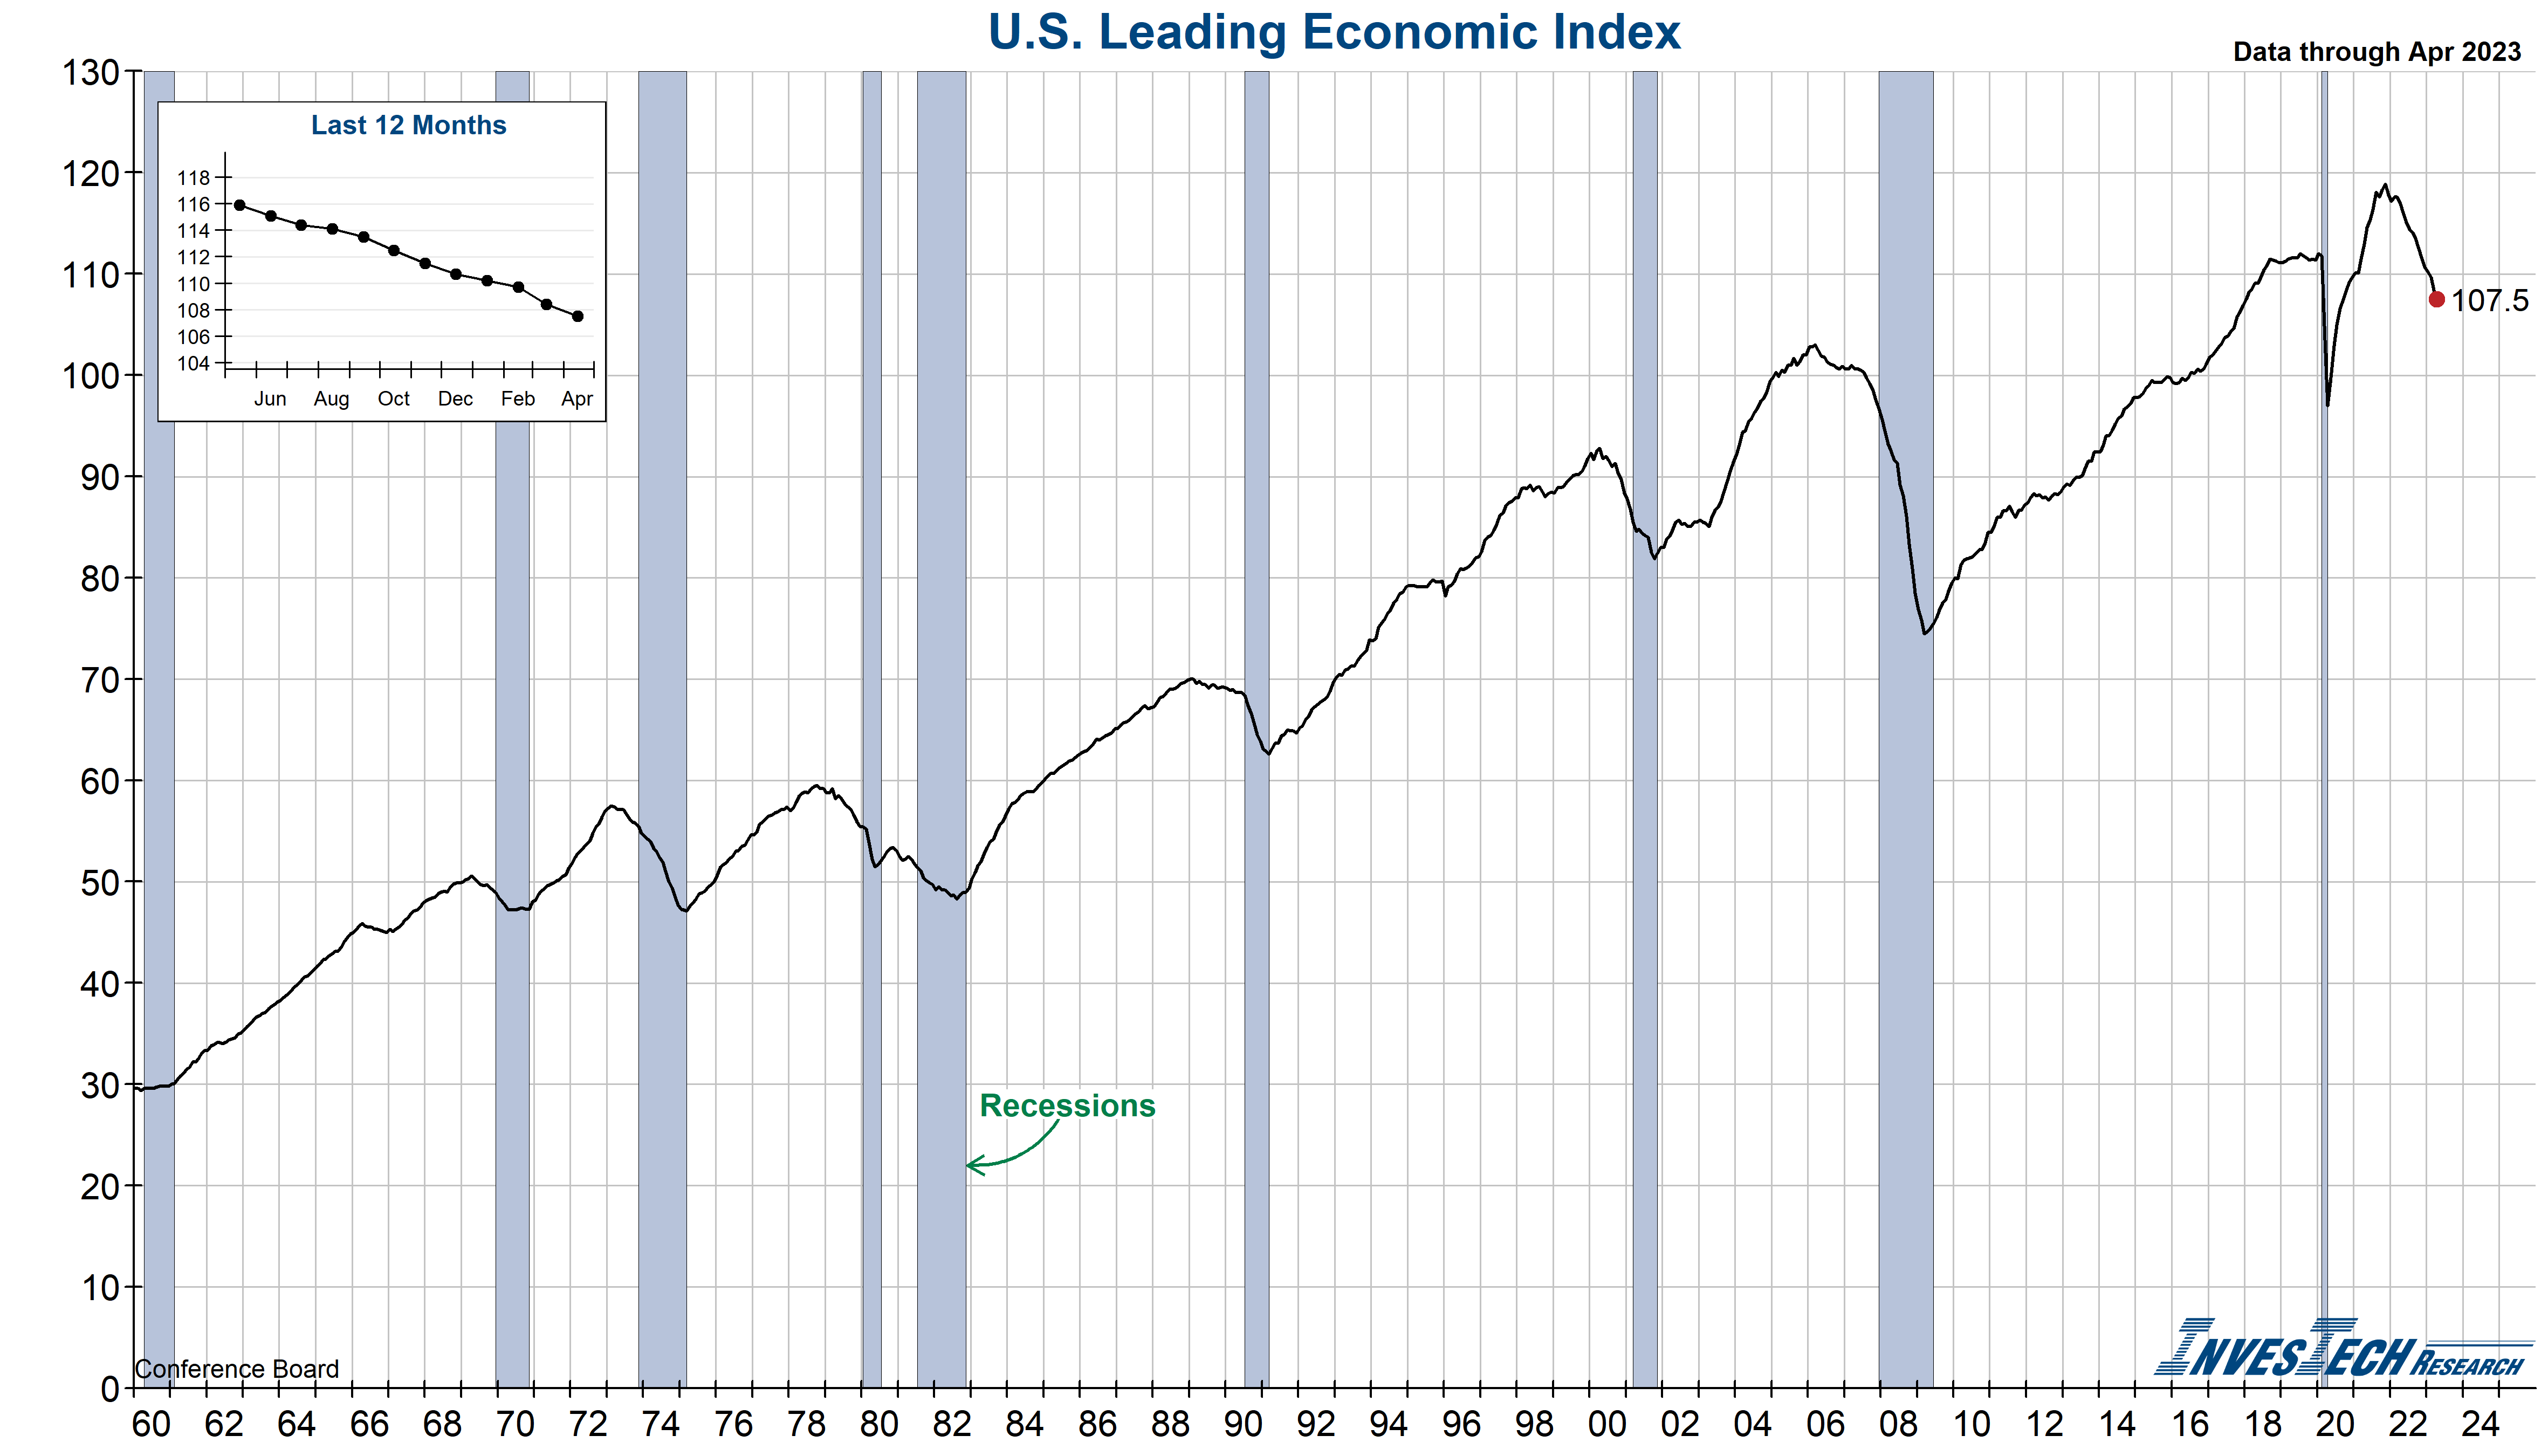 Conference Board Leading Economic Index (LEI)